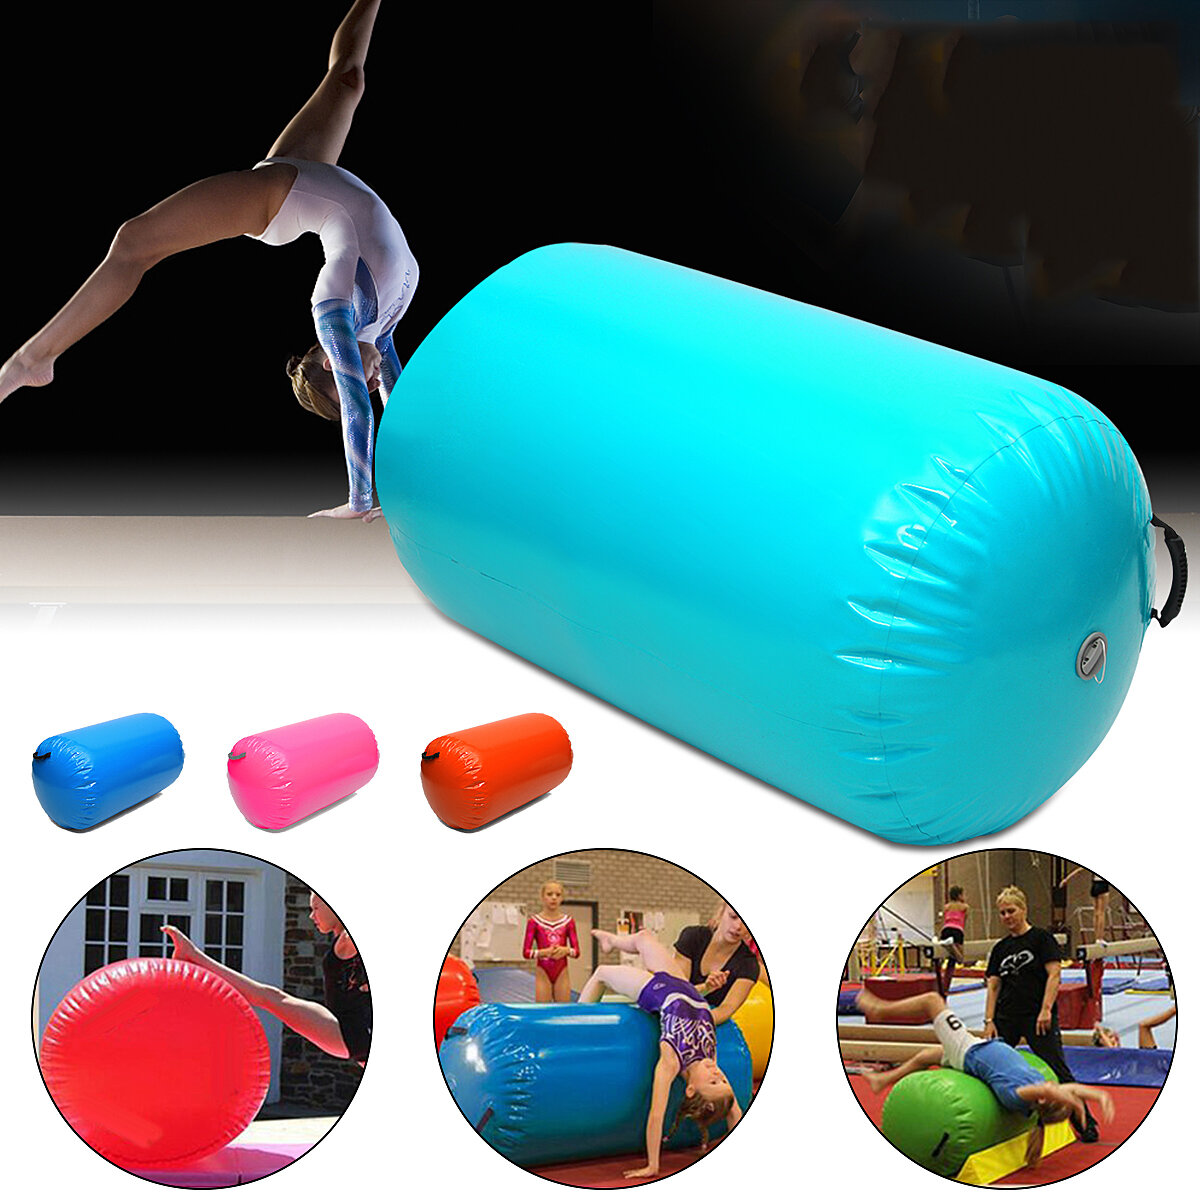 Airtrack Tumbing Mat Inflatable Gymnastics Air Track Home Small Gymnastic Cylinder GYM Gymnastics Mat Beam Airtrack Fitness Inflatable Air Roller Gym/Yoga/Training/Tumbling/hot pink:100 by 80cm 